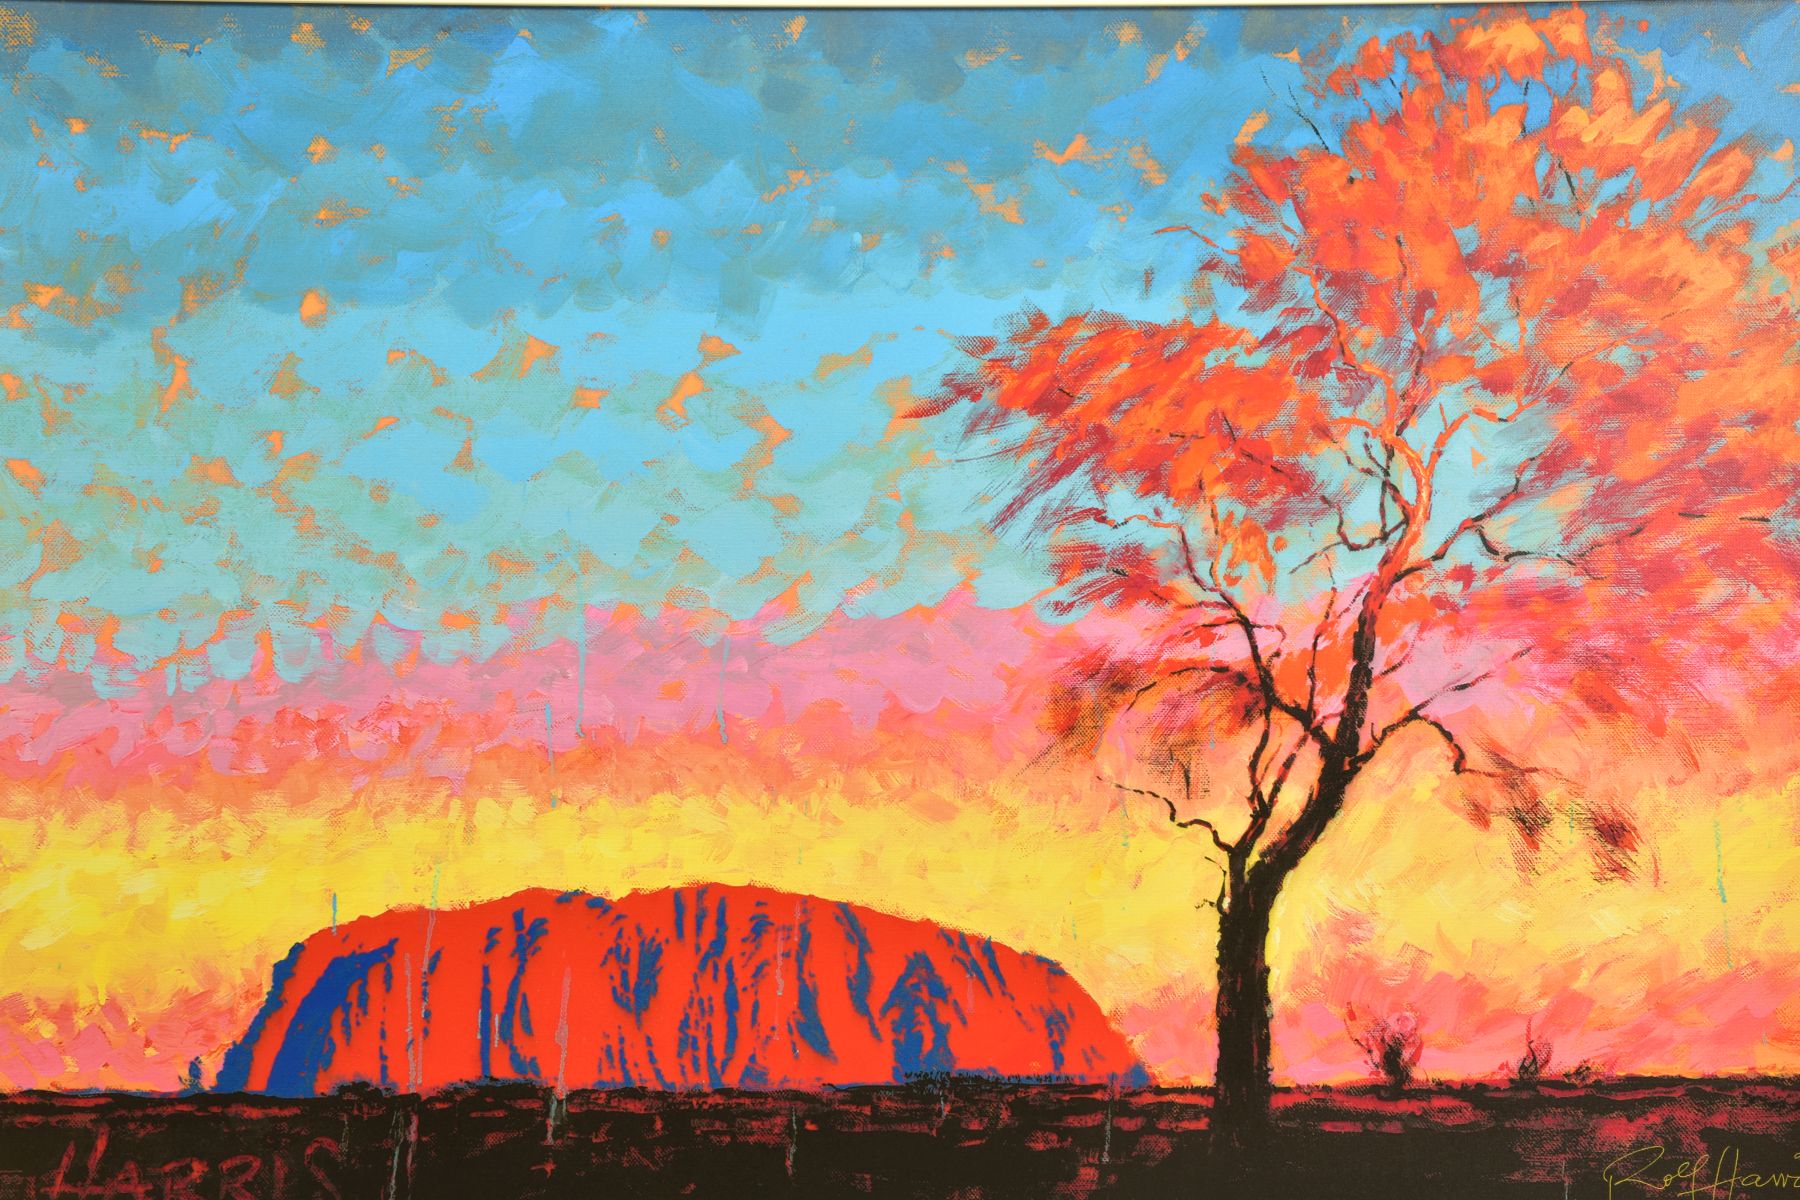 ROLF HARRIS (AUSTRALIAN 1930) 'ULURU SUNSET, SURPRISE SHOWER' a limited edition print on canvas of - Image 2 of 18